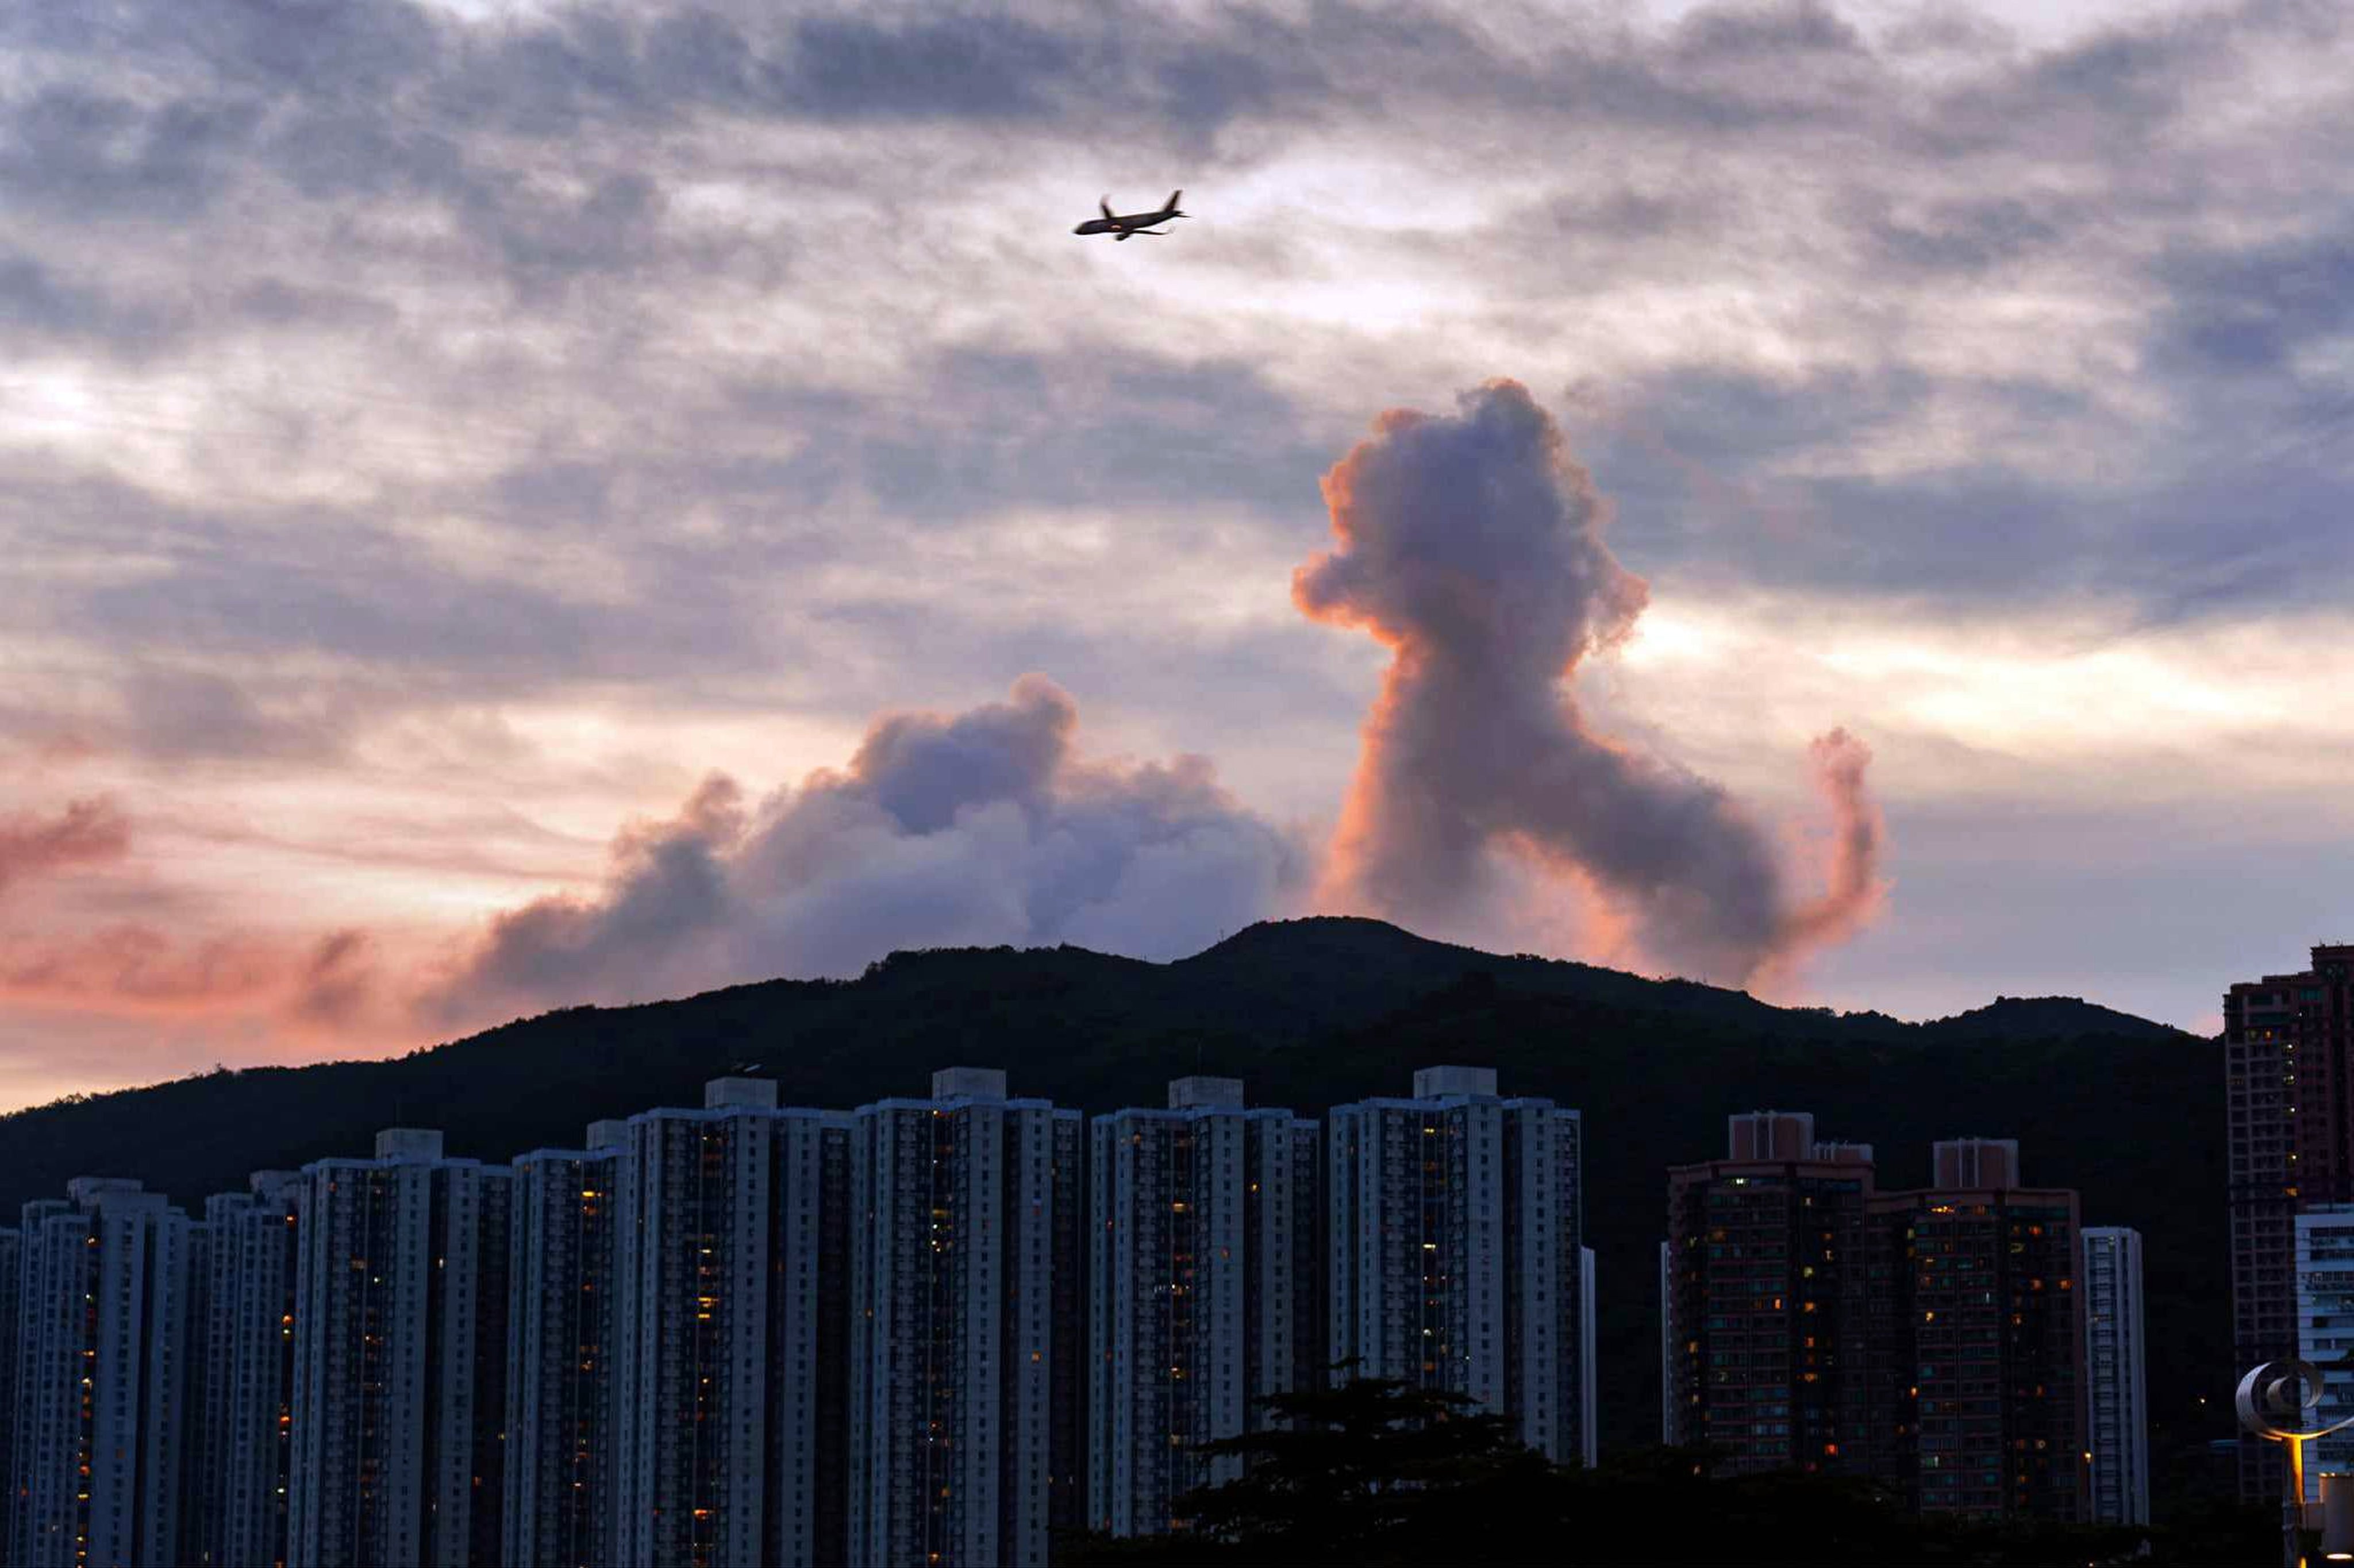 The cloud was sighted in Tsuen Wan last Thursday, Hong Kong’s weather forecaster said. Photo: Handout